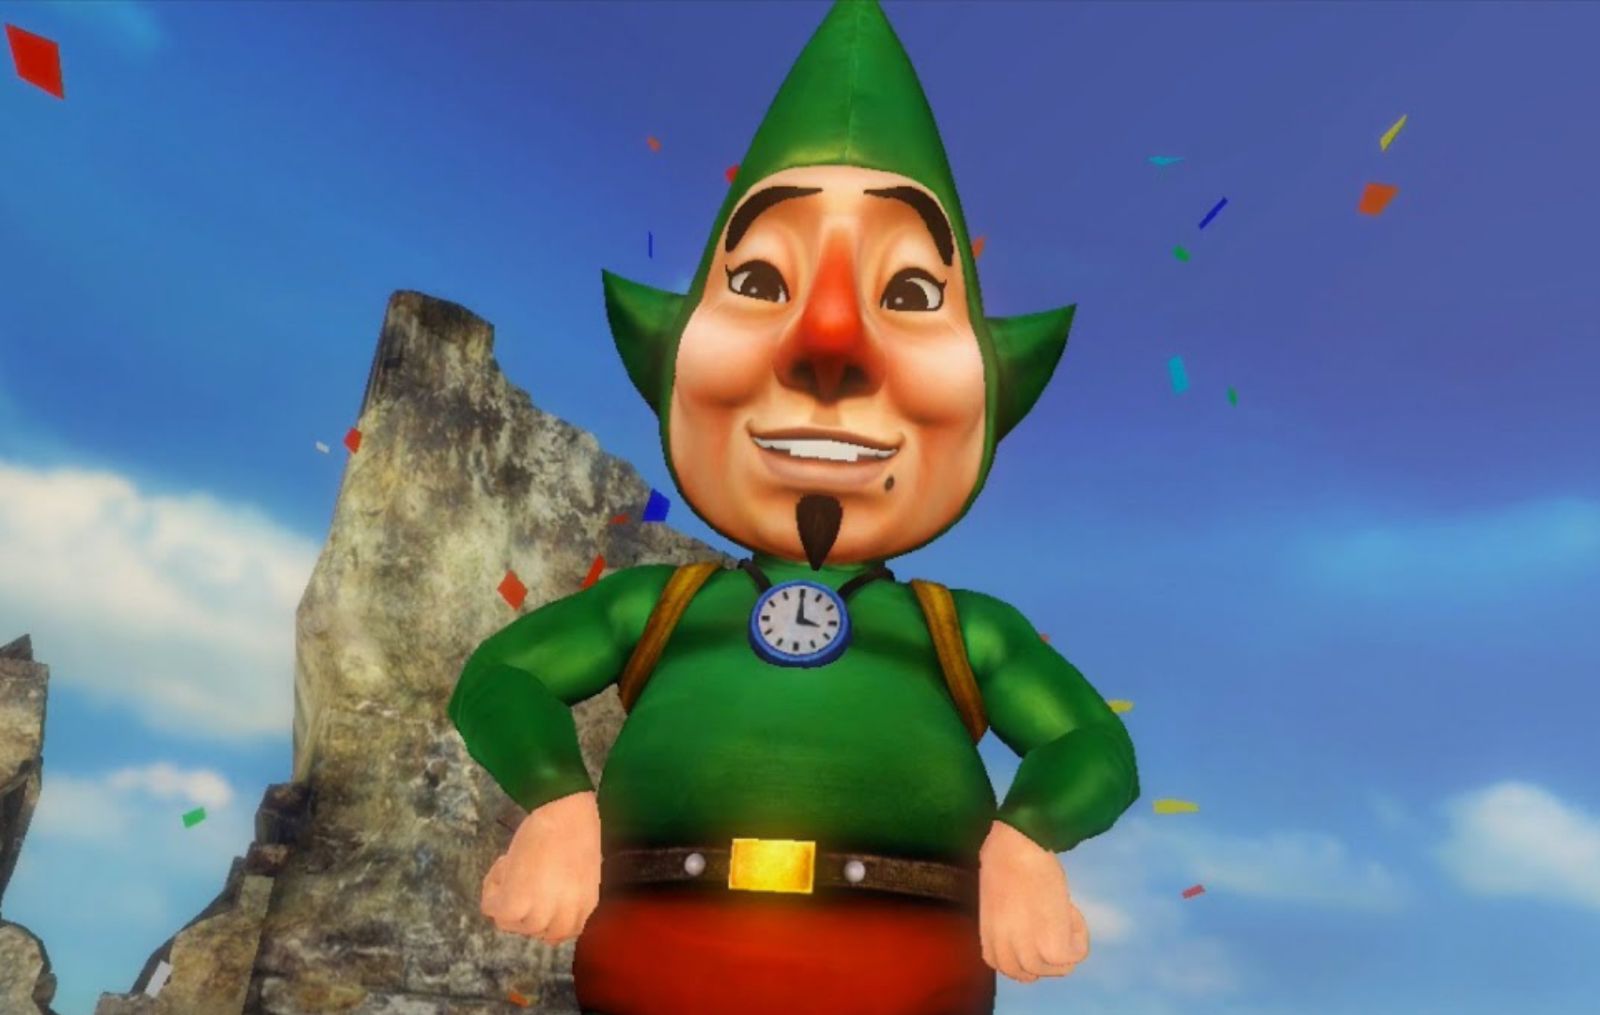 Image of a person with a red nose wearing a full-green outfit with a clock in the centre of his chest, plus red trousers with a brown belt.